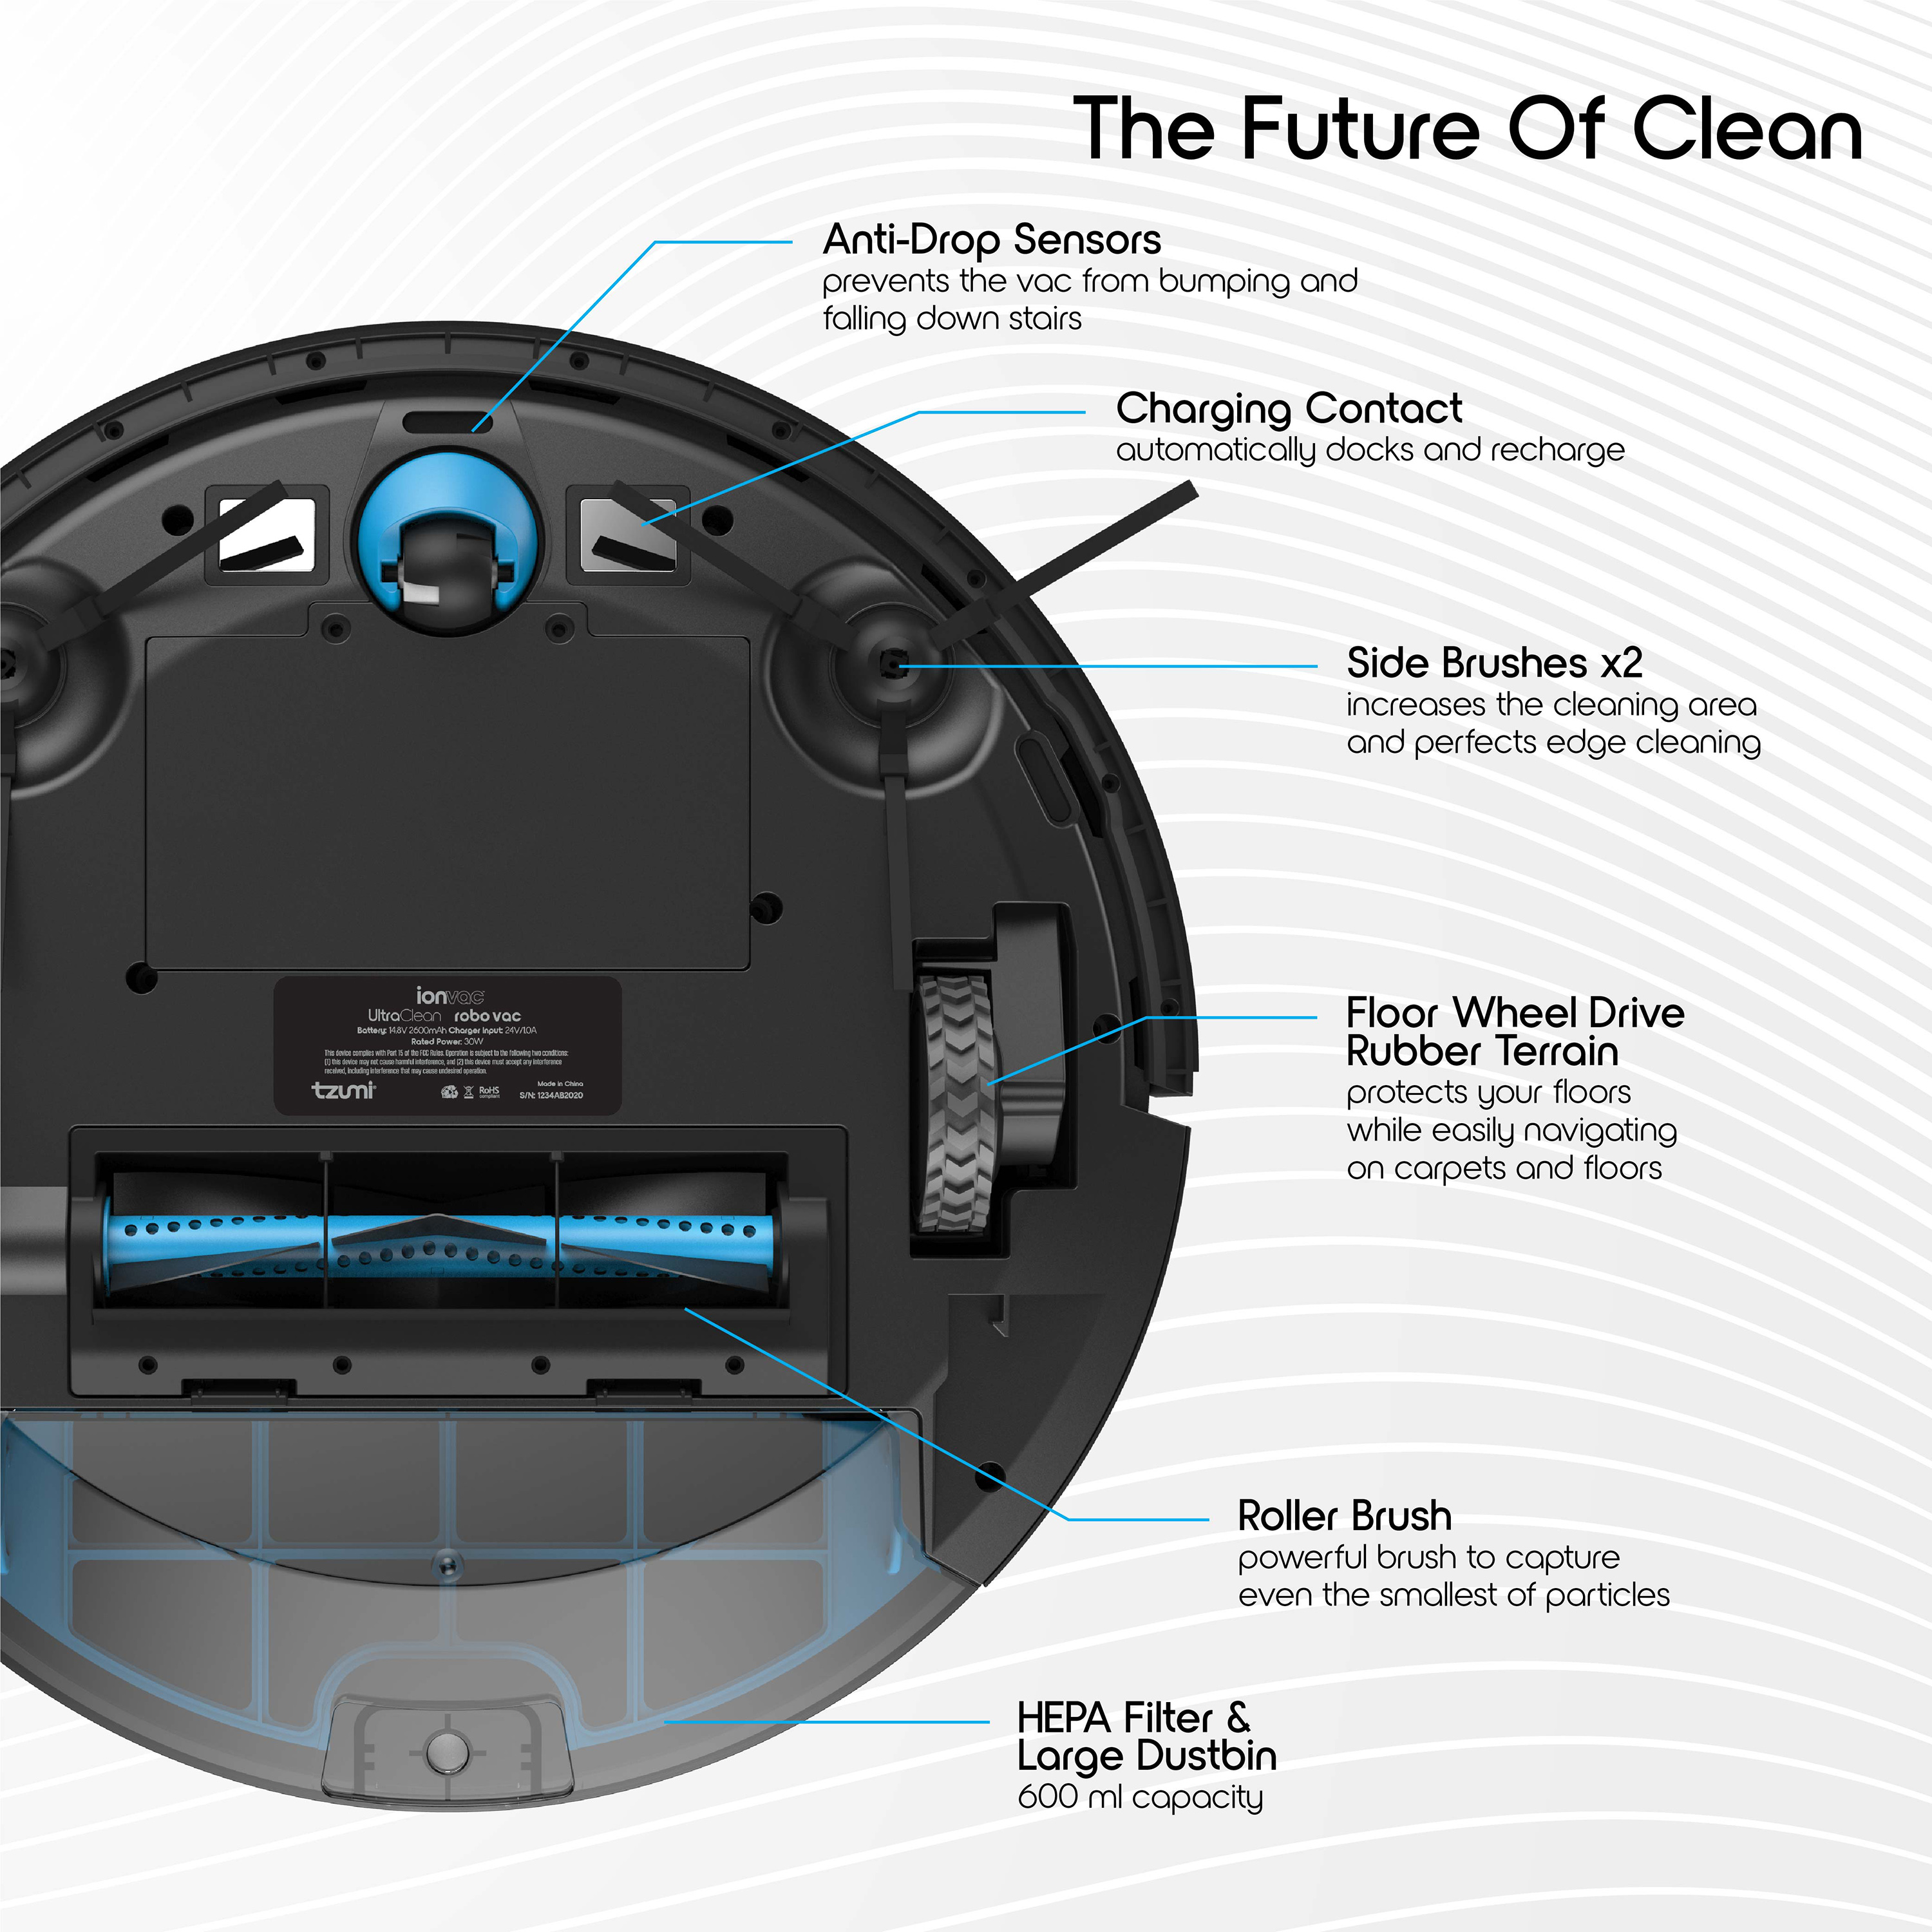 IonVac UltraClean Robovac with Smart Mapping, Wi-Fi Robot Vacuum Cleaner with App/Remote Control - image 2 of 10